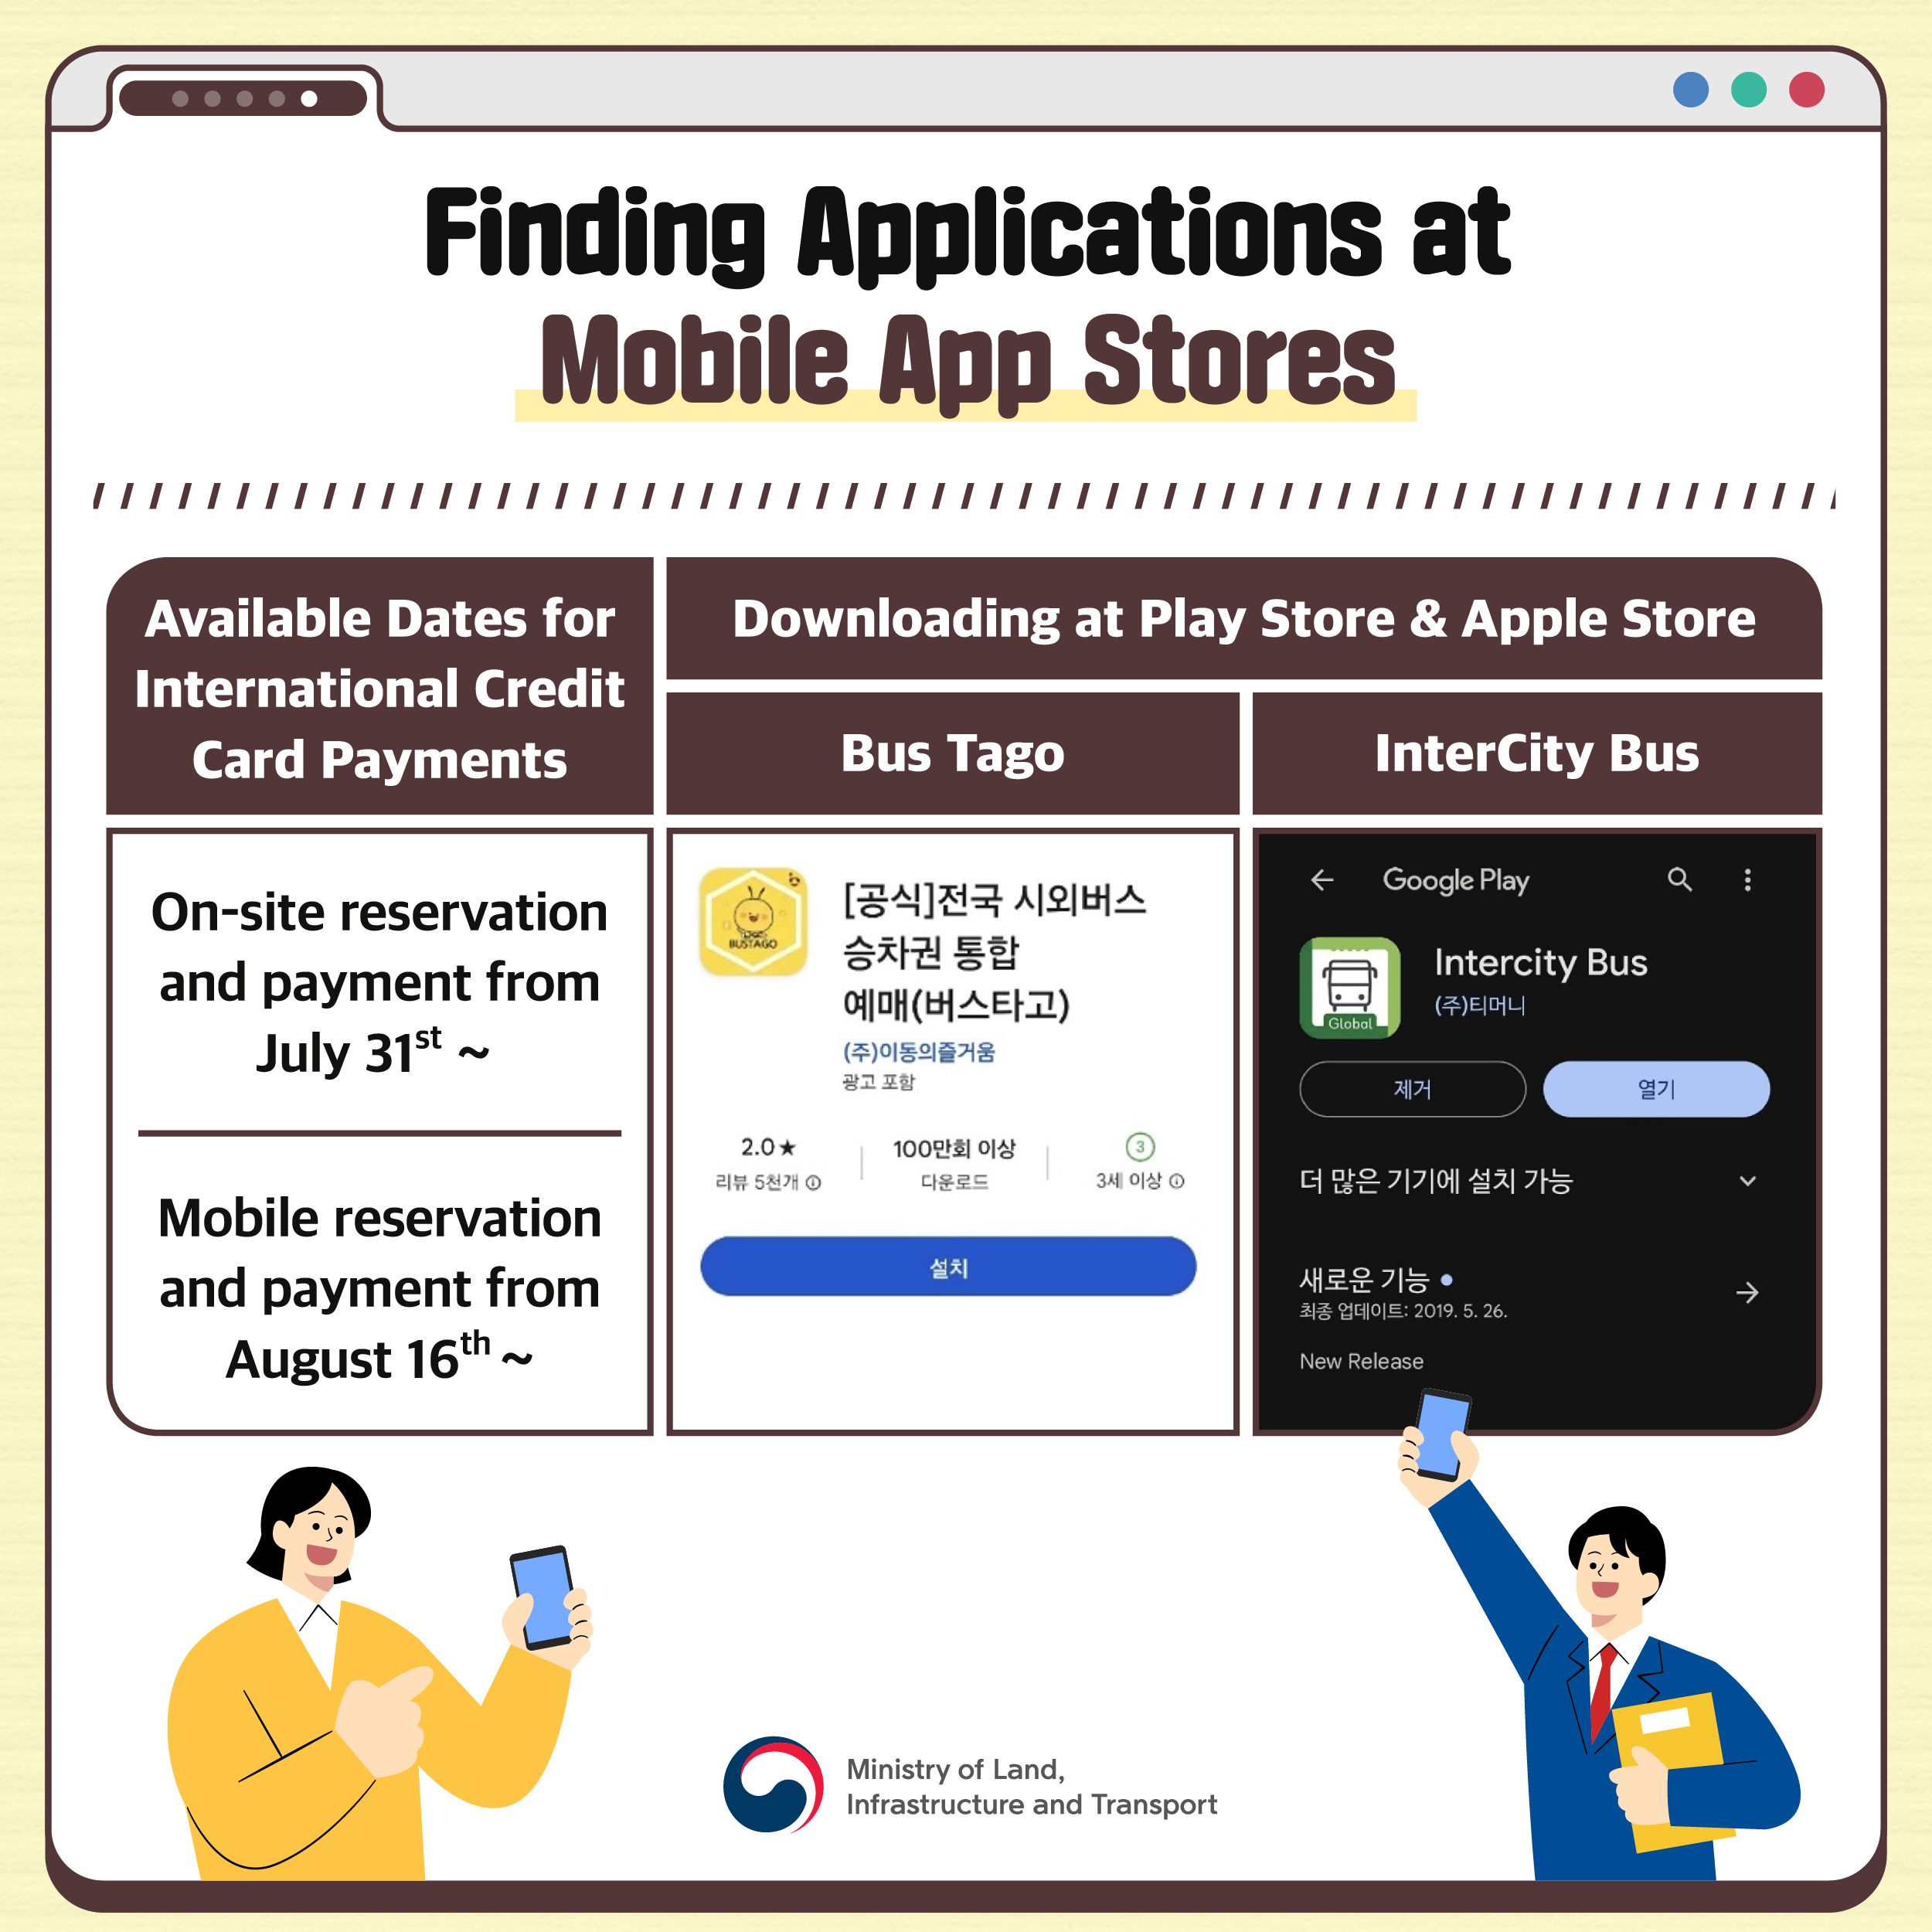 pic 6. Finding Applications at Mobile App Stores

Available Dates for International Credit Card Payments:

On-site reservation and payment from July 31st ~
Mobile reservation and payment from August 16th ~
Downloading at Play Store & Apple Store:

Bus Tago,
InterCity Bus